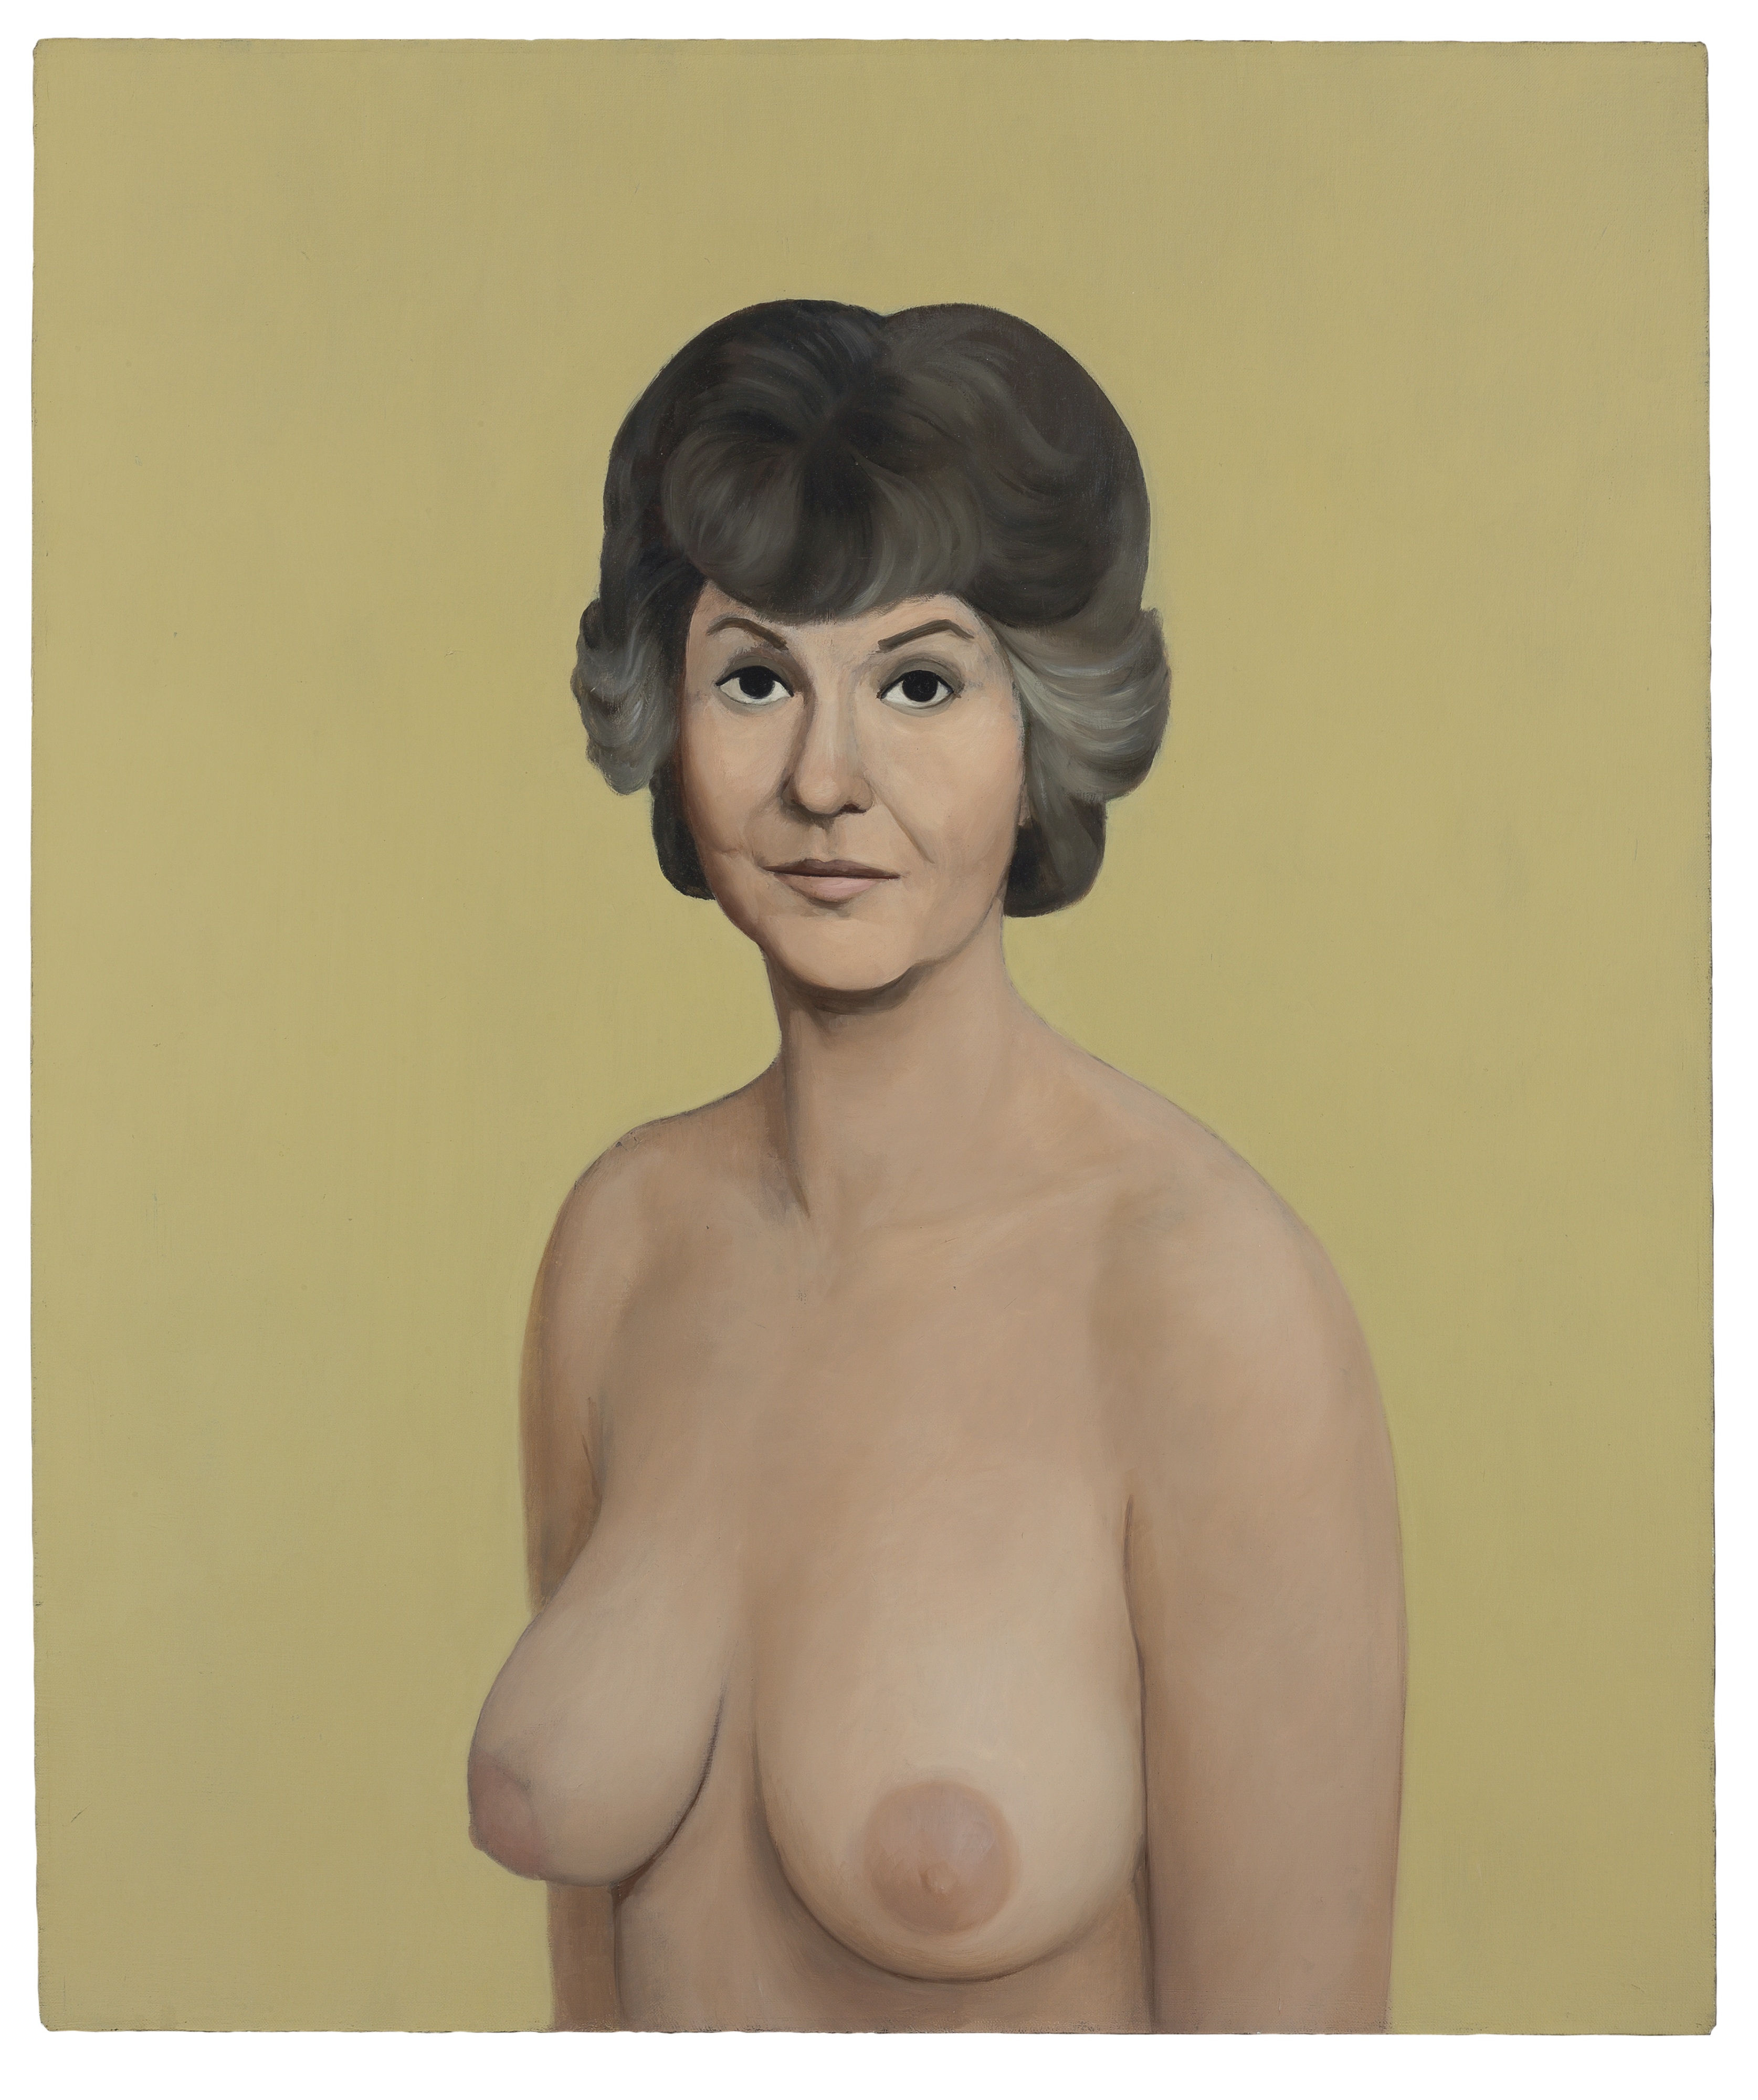 Naked Topless Bea Arthur Painting Sells At Auction For $1.9M picture